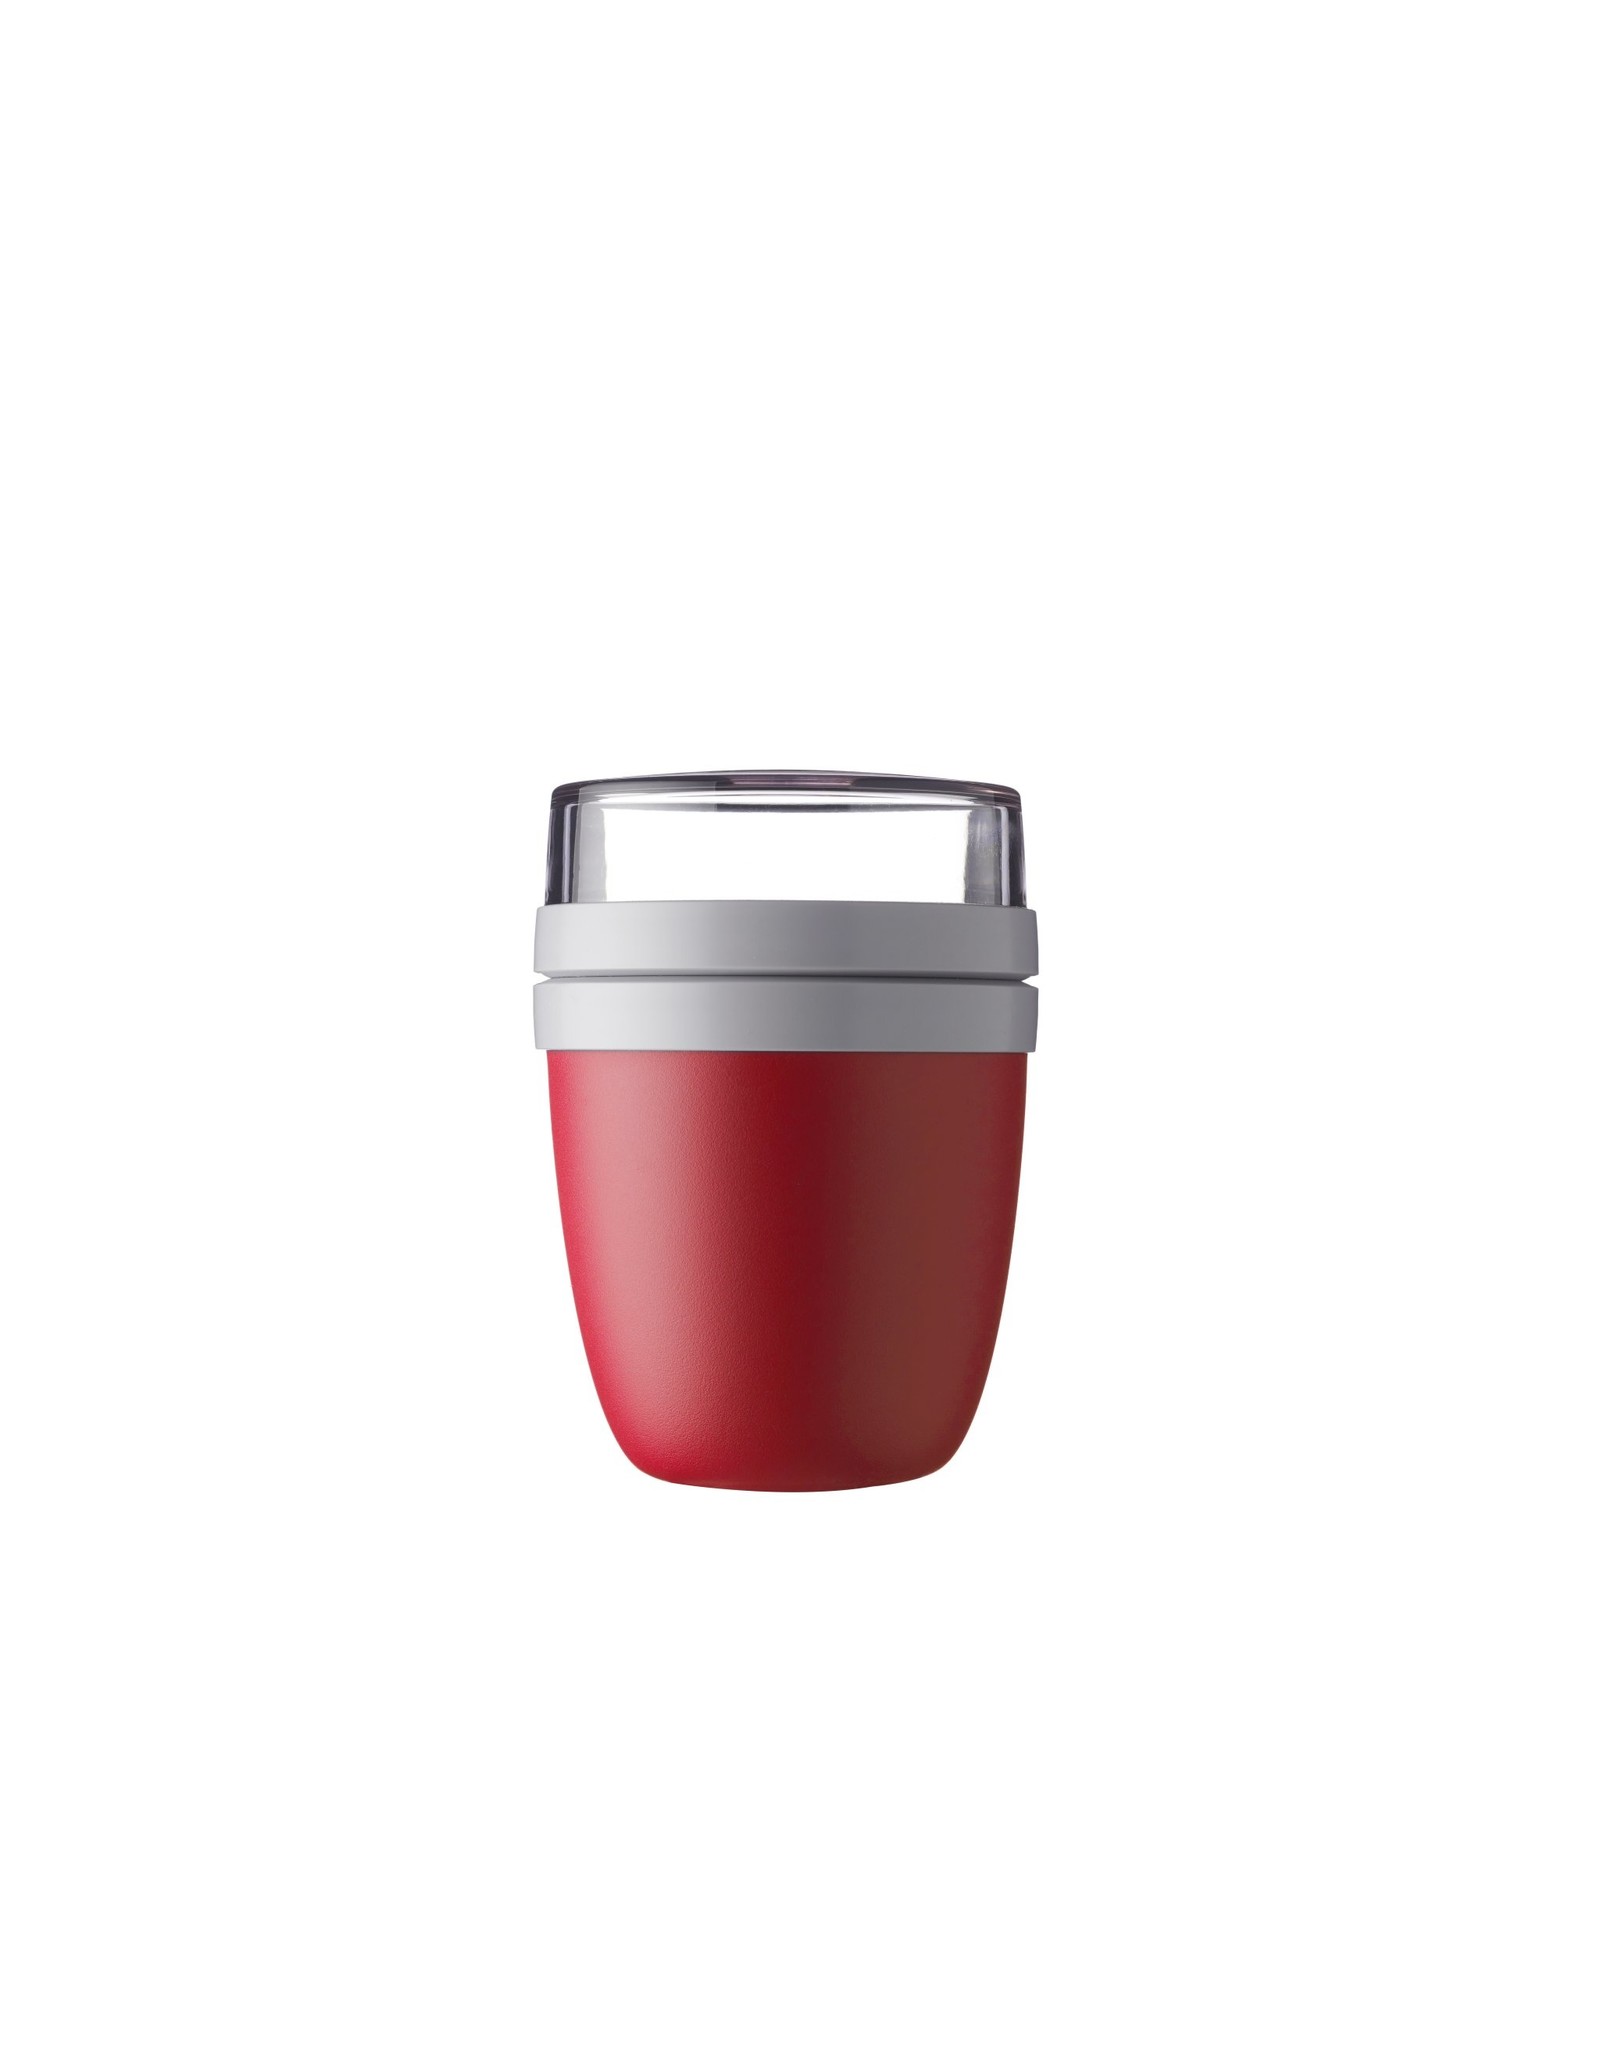 Mepal Mepal Lunchpot Ellipse Nordic Red